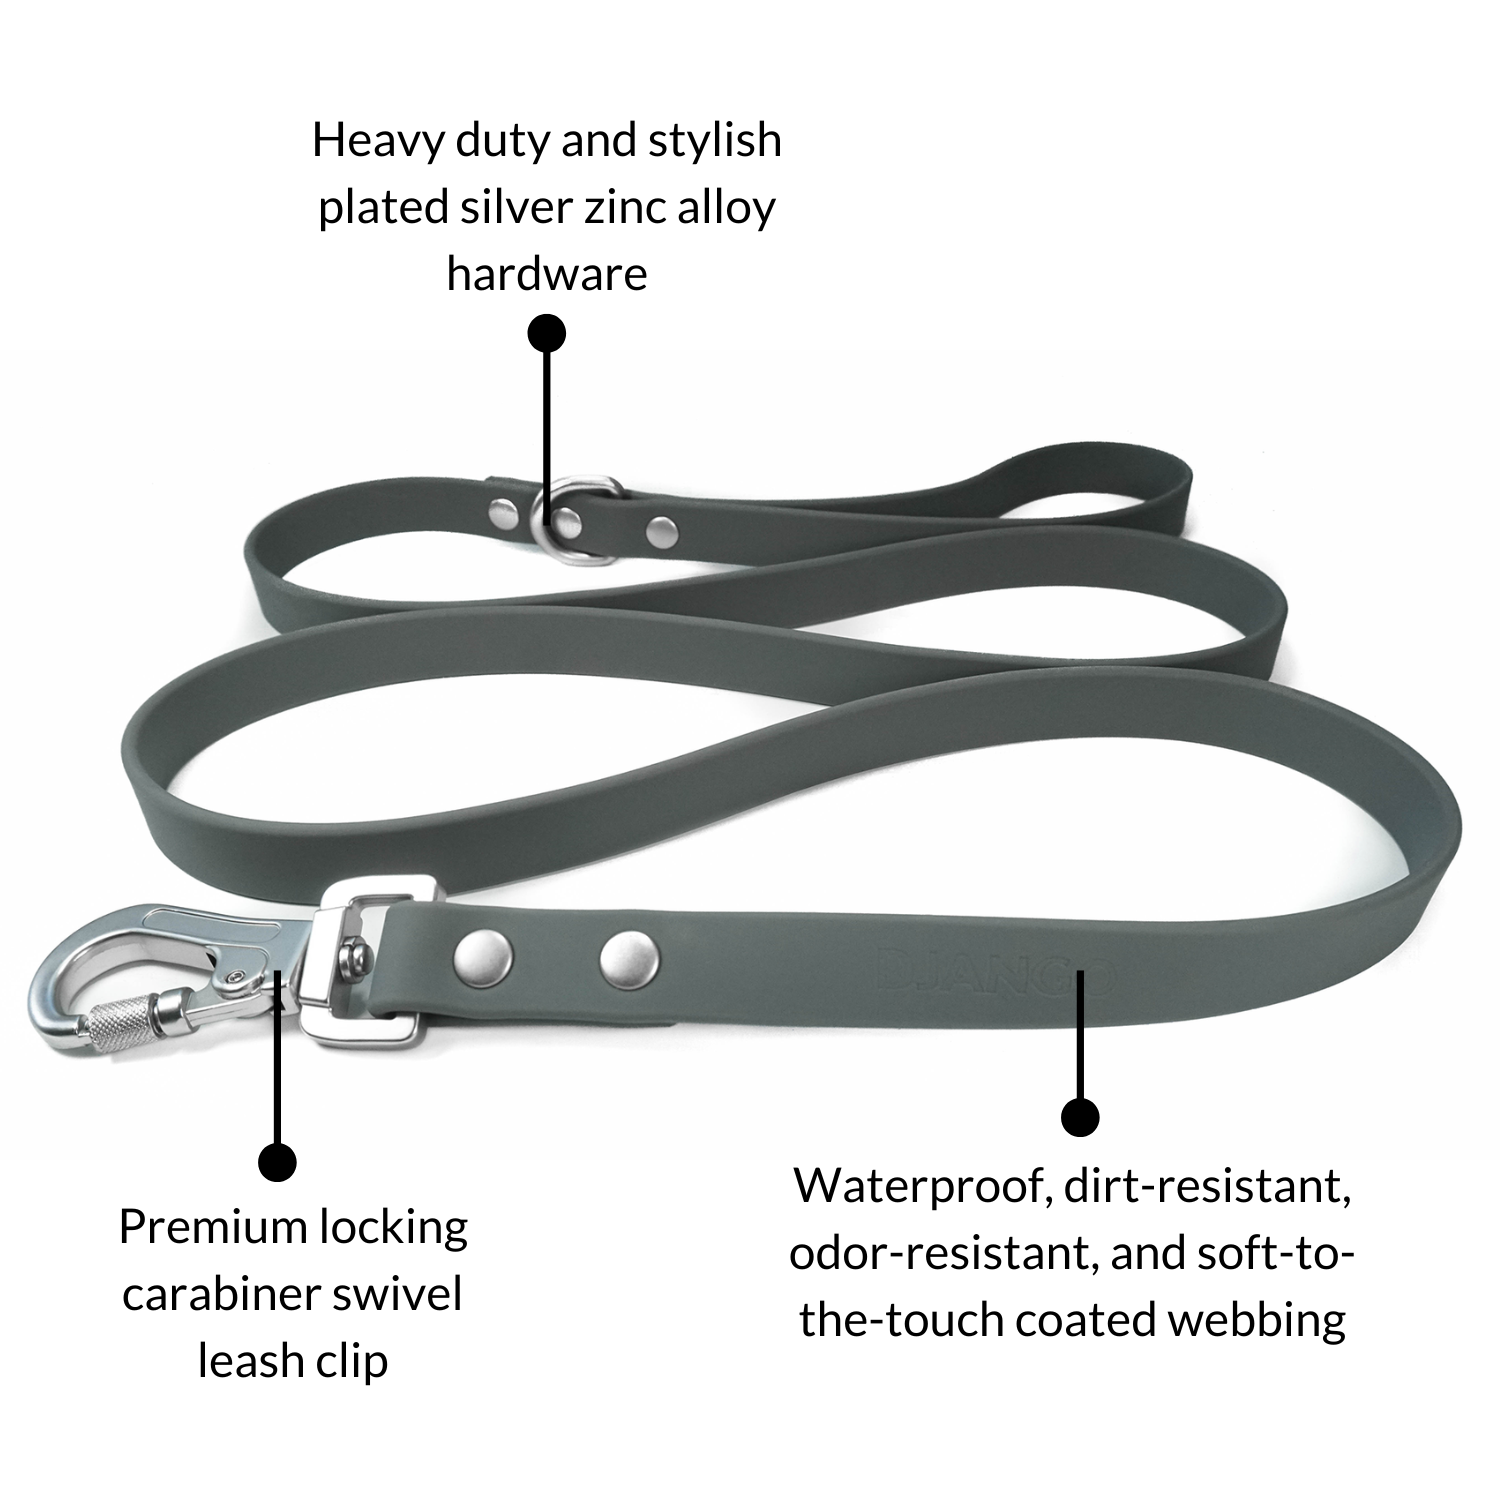 DJANGO Tahoe Dog Leash in Poppy Seed Gray - The waterproof dog leash features heavy duty and stylish plated silver hardware and a premium locking carabiner leash clip for extra security - djangobrand.com 